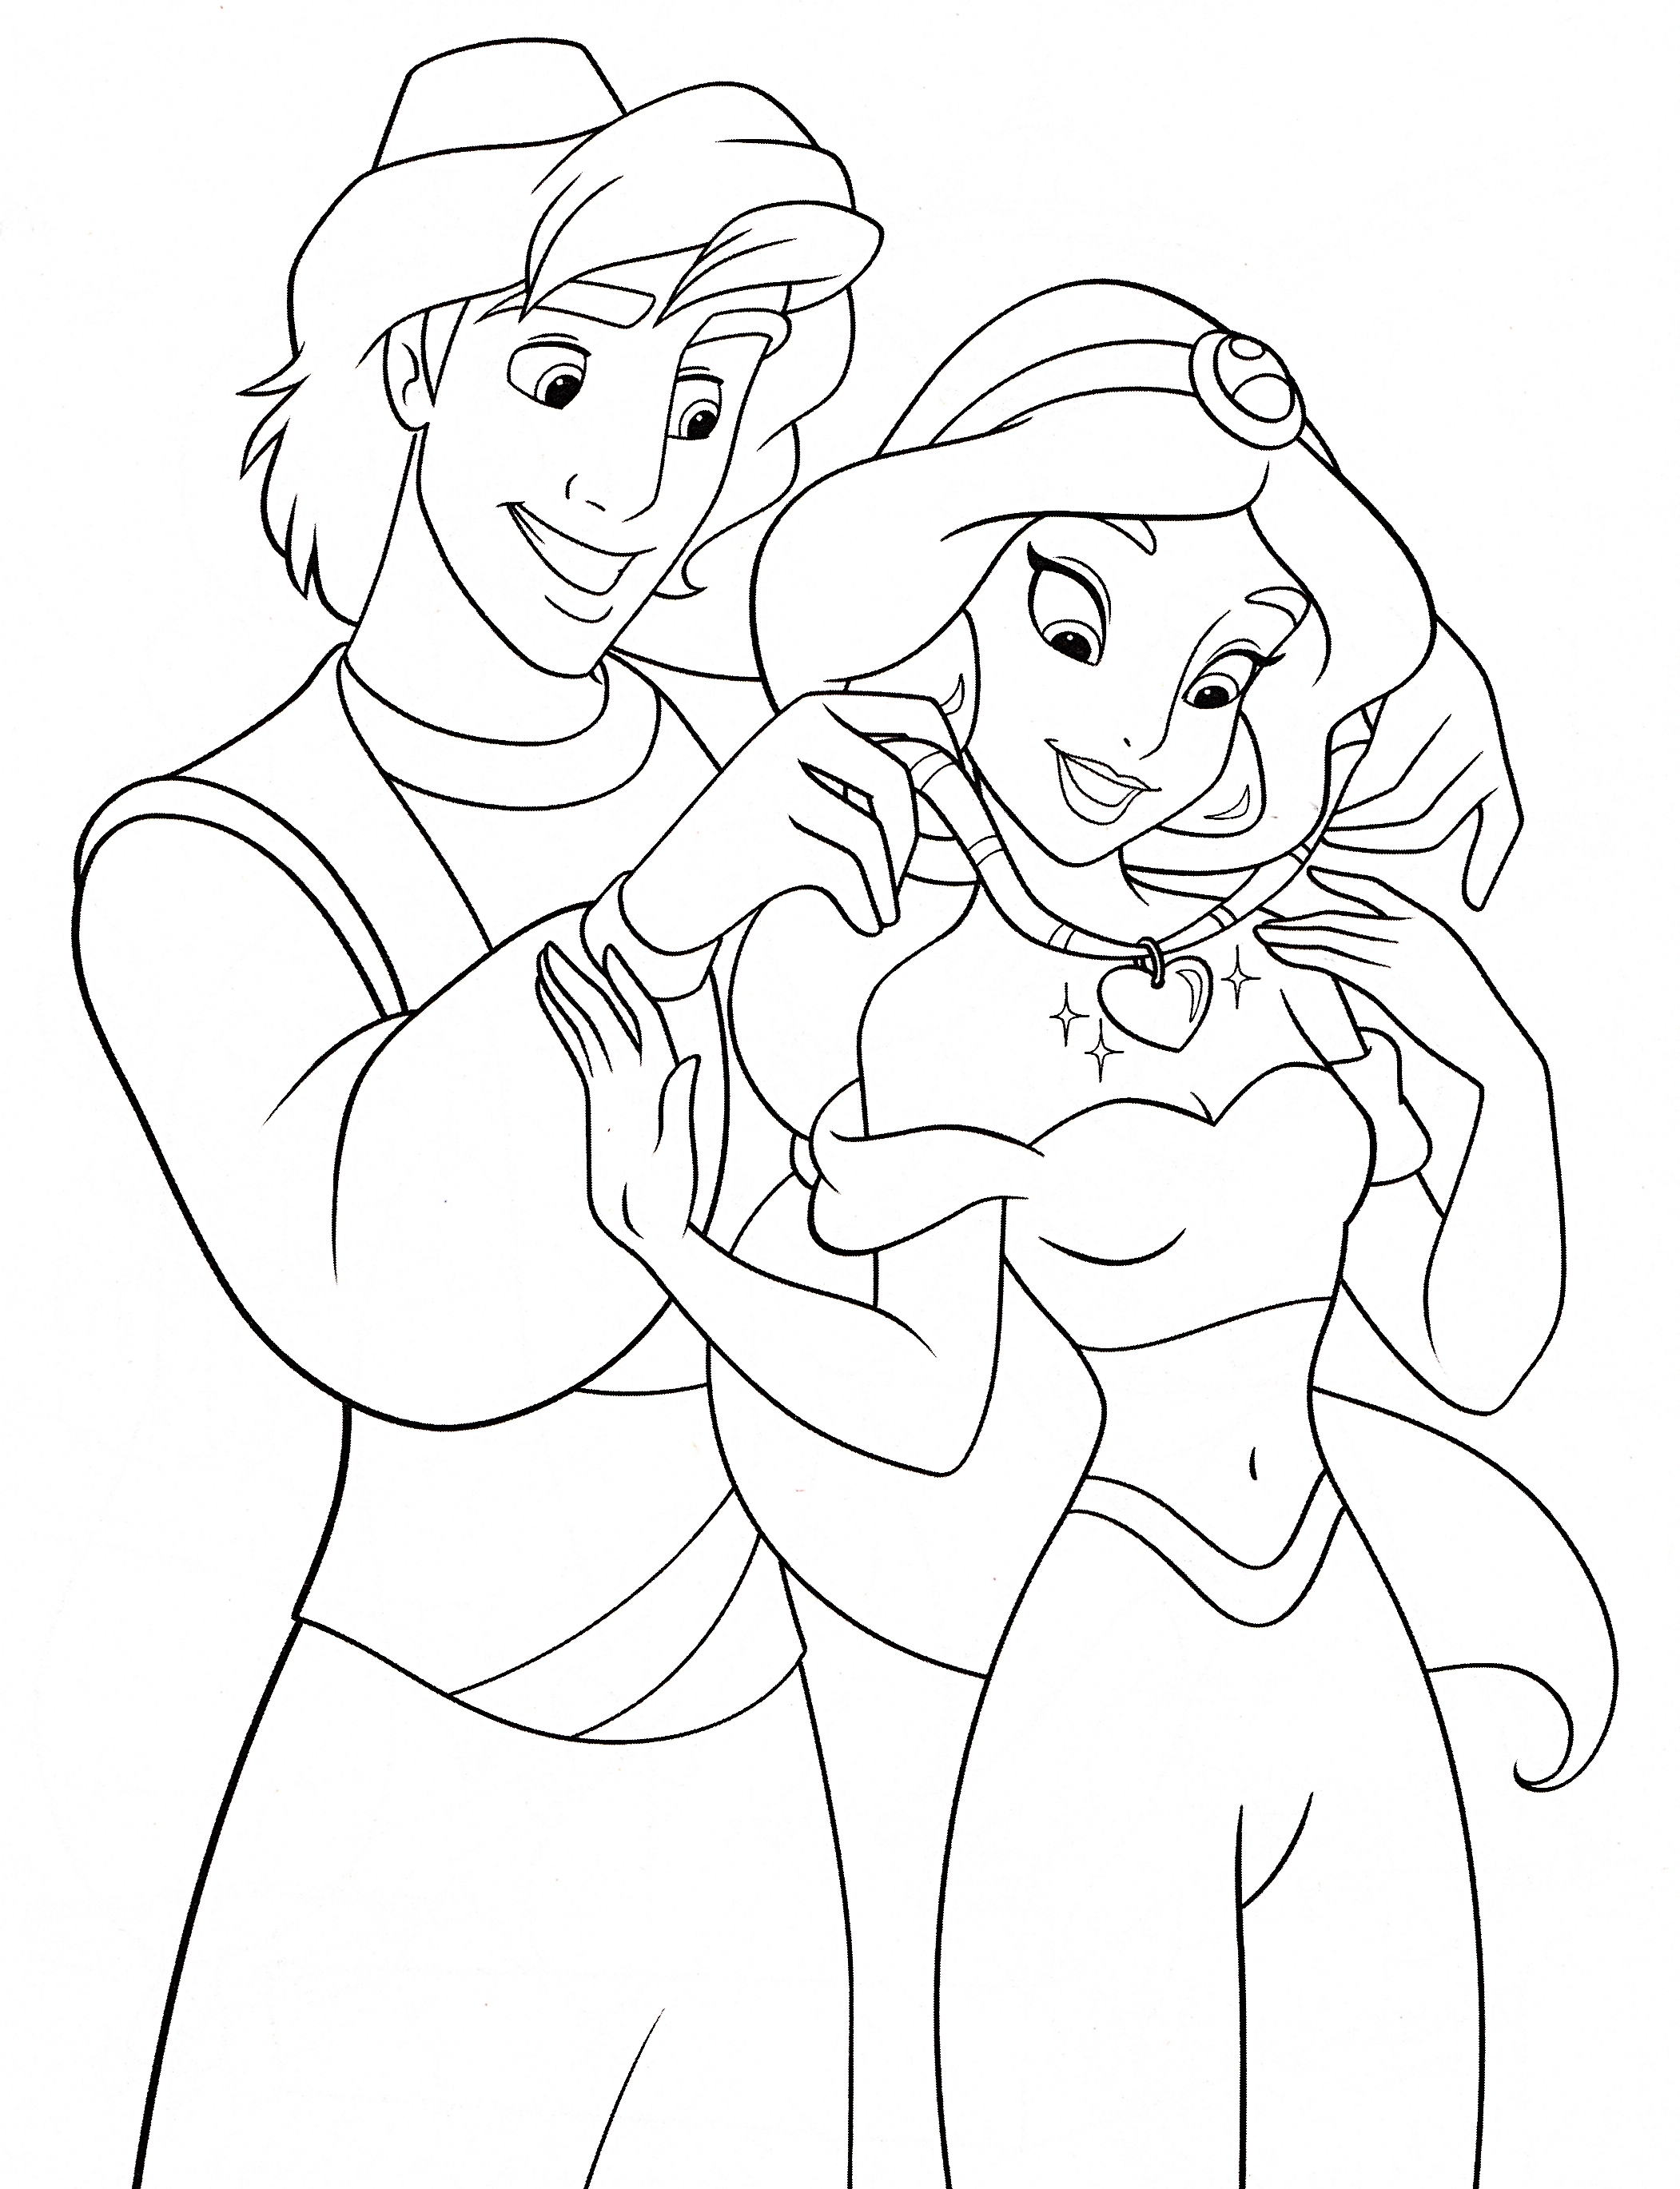 Disney Coloring Pages Aladdin at GetColorings.com | Free ...